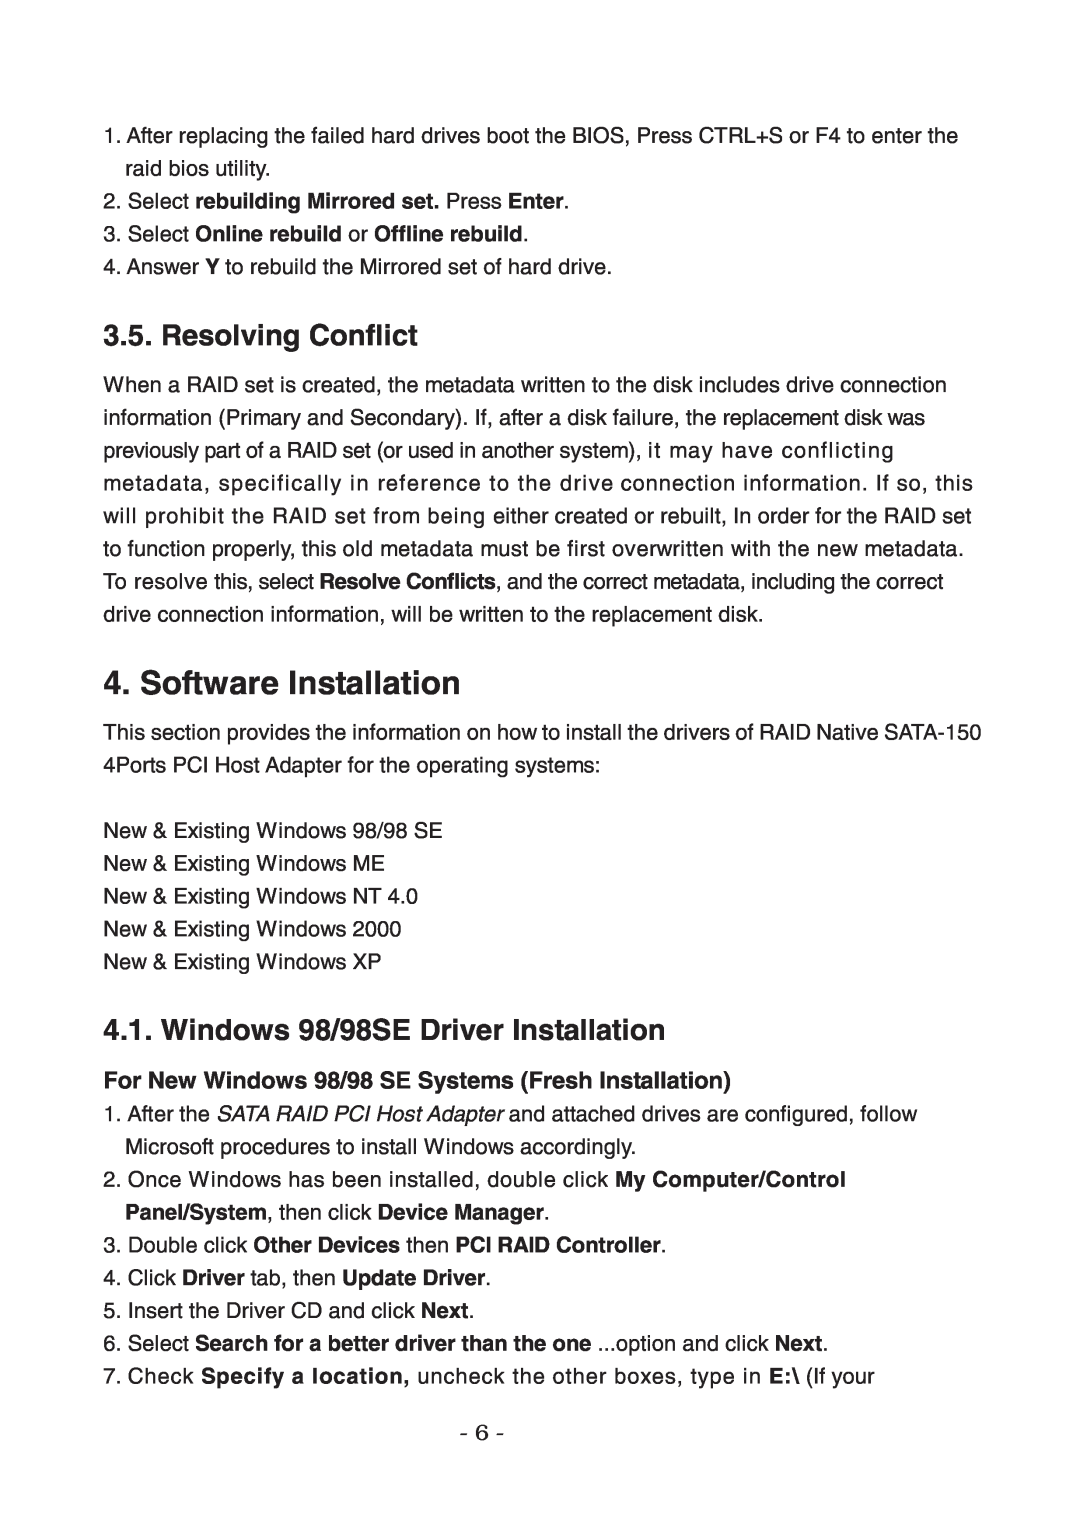 Lindy 70542, 70541 user manual Software Installation, Resolving Conflict, Windows 98/98SE Driver Installation 